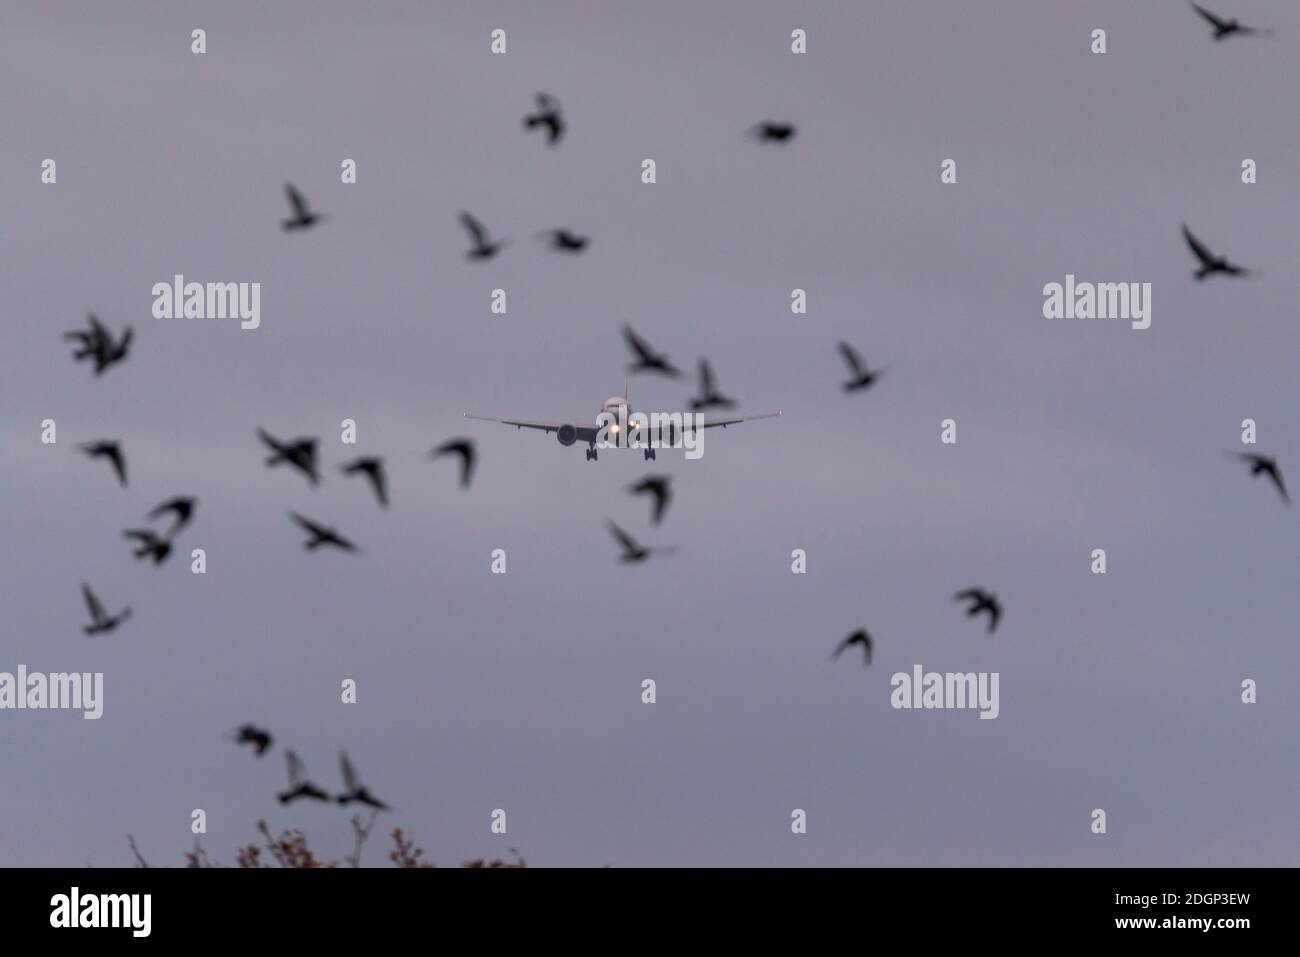 London Heathrow Airport, London, UK. 9th Dec, 2020. Overnight rain has cleared into a cloudy cool morning as the first arrivals land at Heathrow. Birds gathered in the field below the approach sometimes flock in front of the landing jets Stock Photo